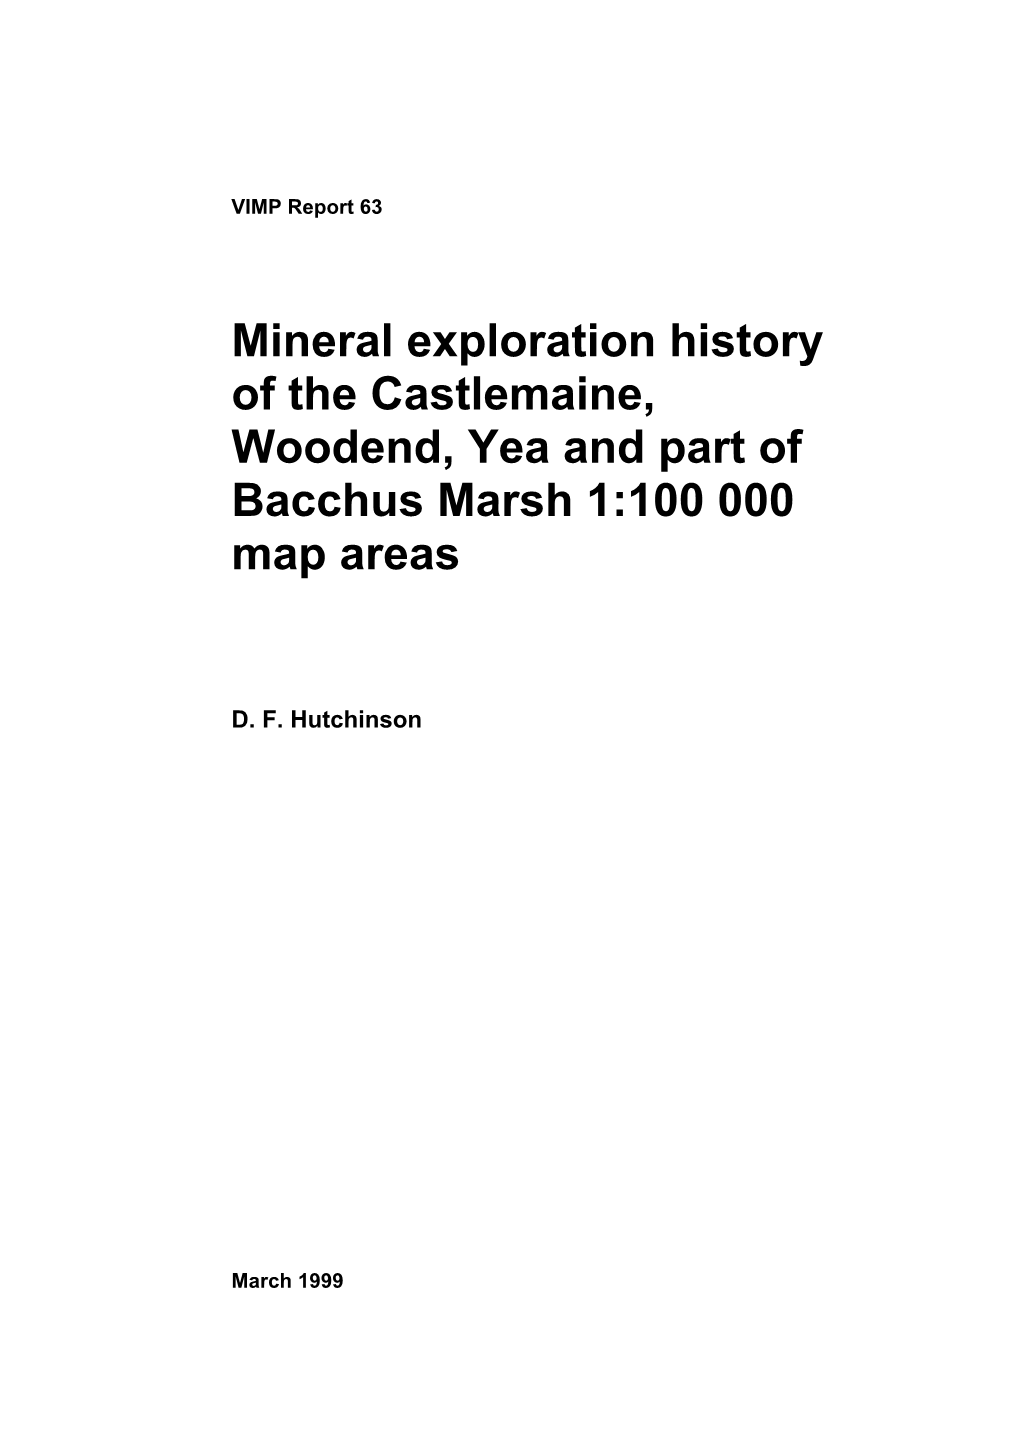 Mineral Exploration History of the Castlemaine, Woodend, Yea and Part of Bacchus Marsh 1:100 000 Map Areas